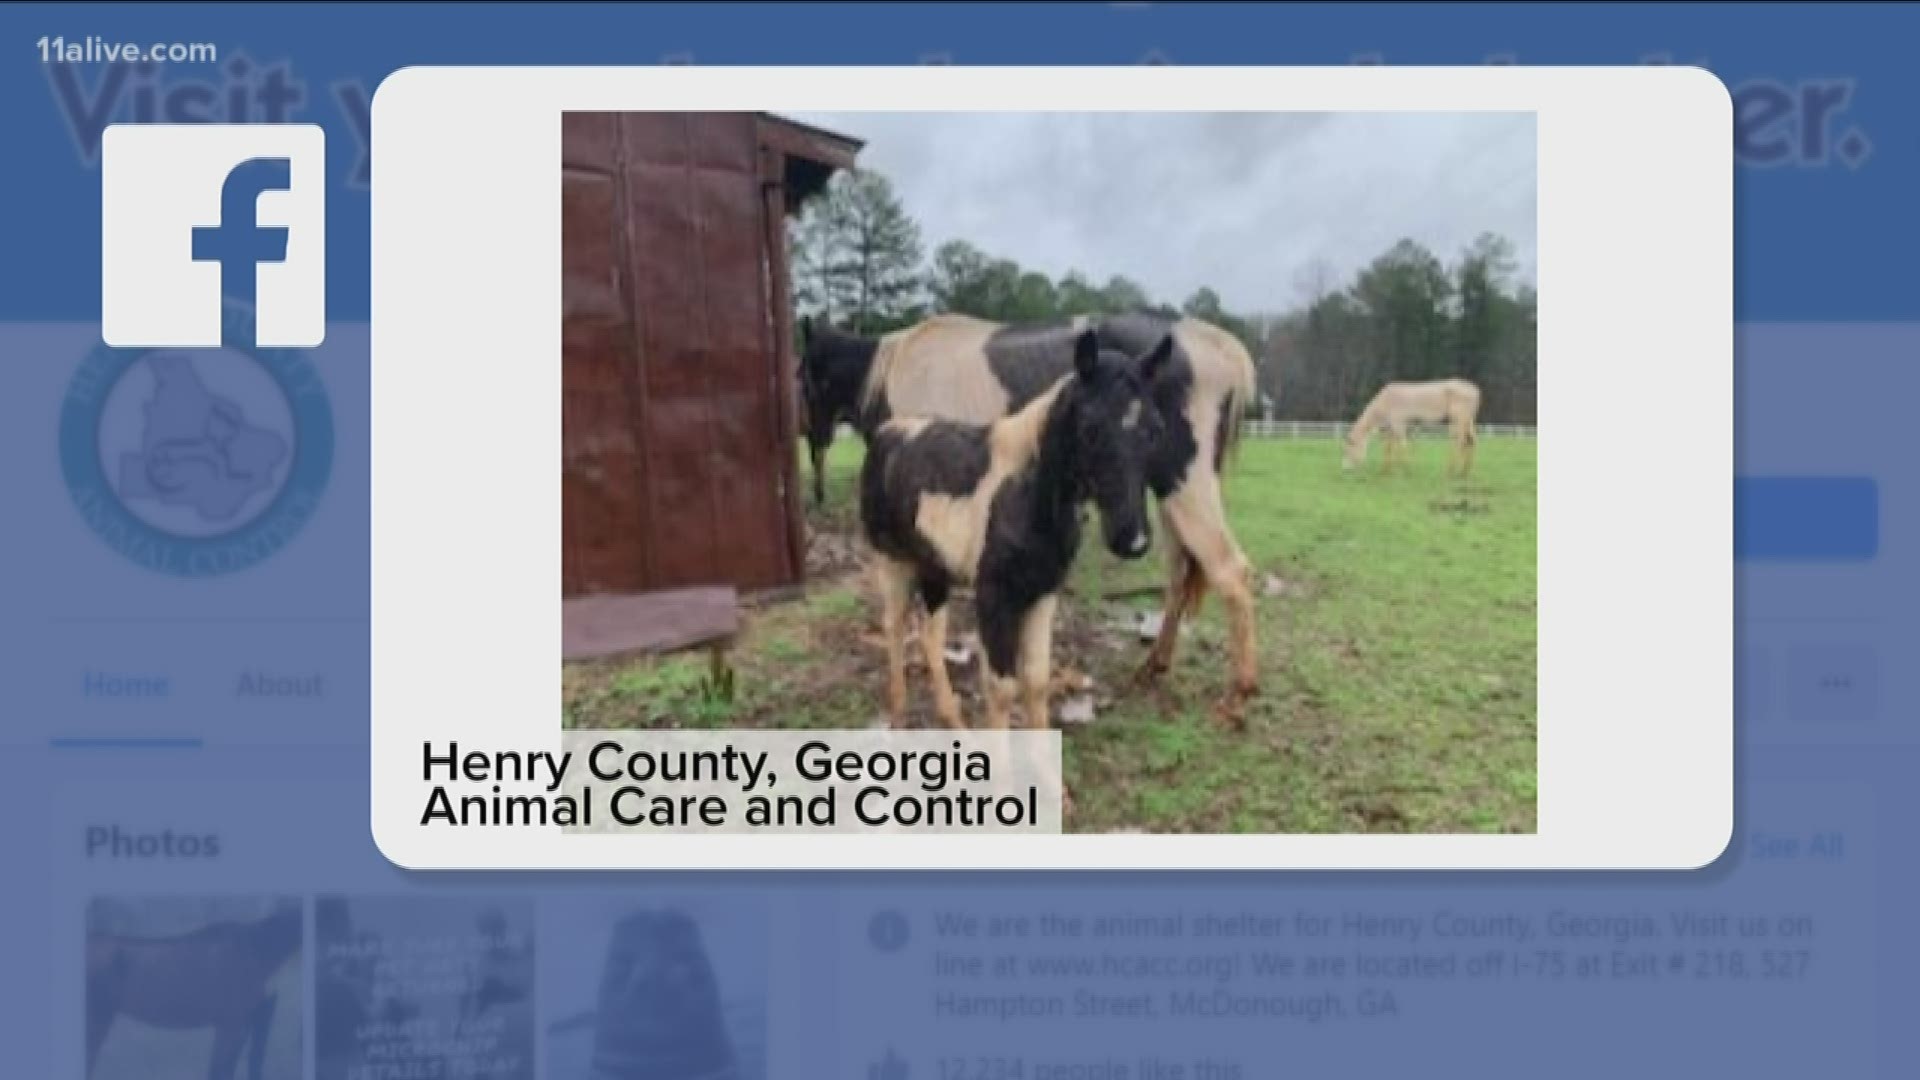 Local groups are now taking donations and money to help care for the horses.